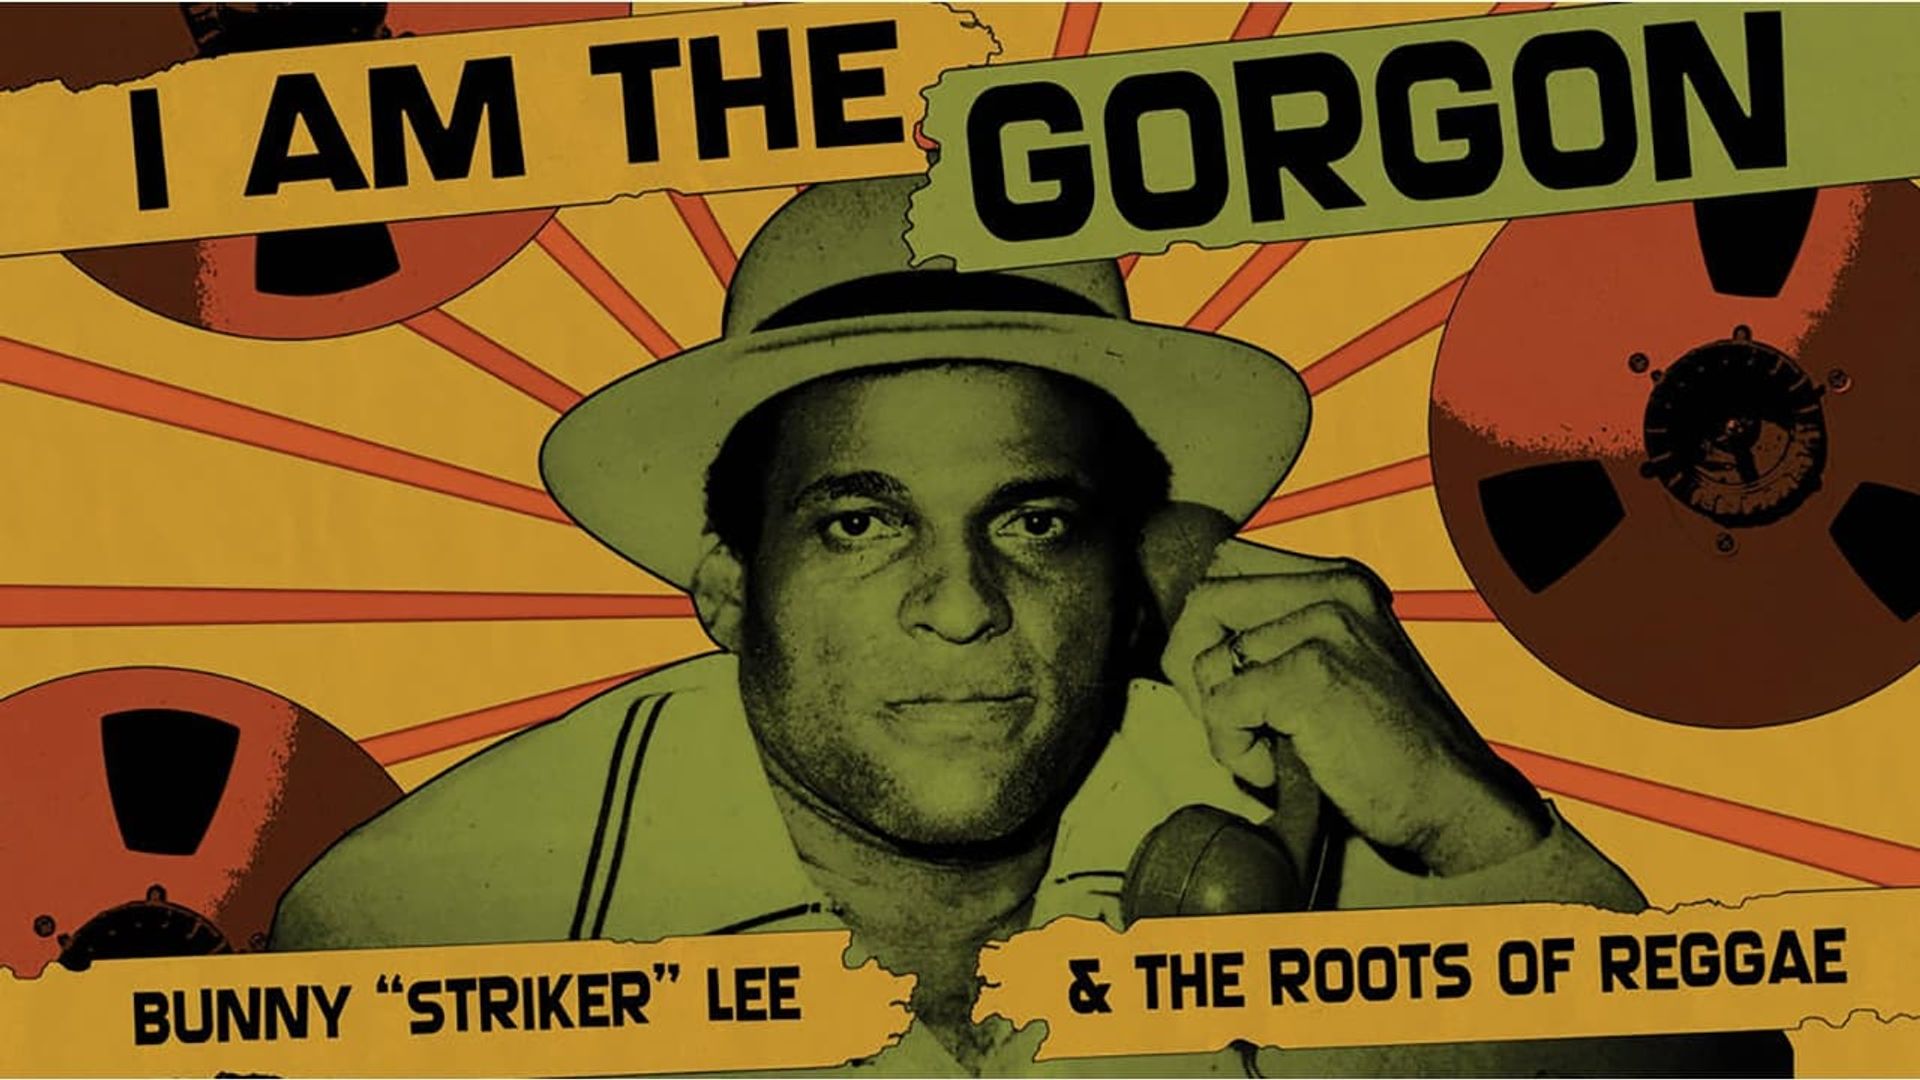 I Am the Gorgon: Bunny 'Striker' Lee and the Roots of Reggae background